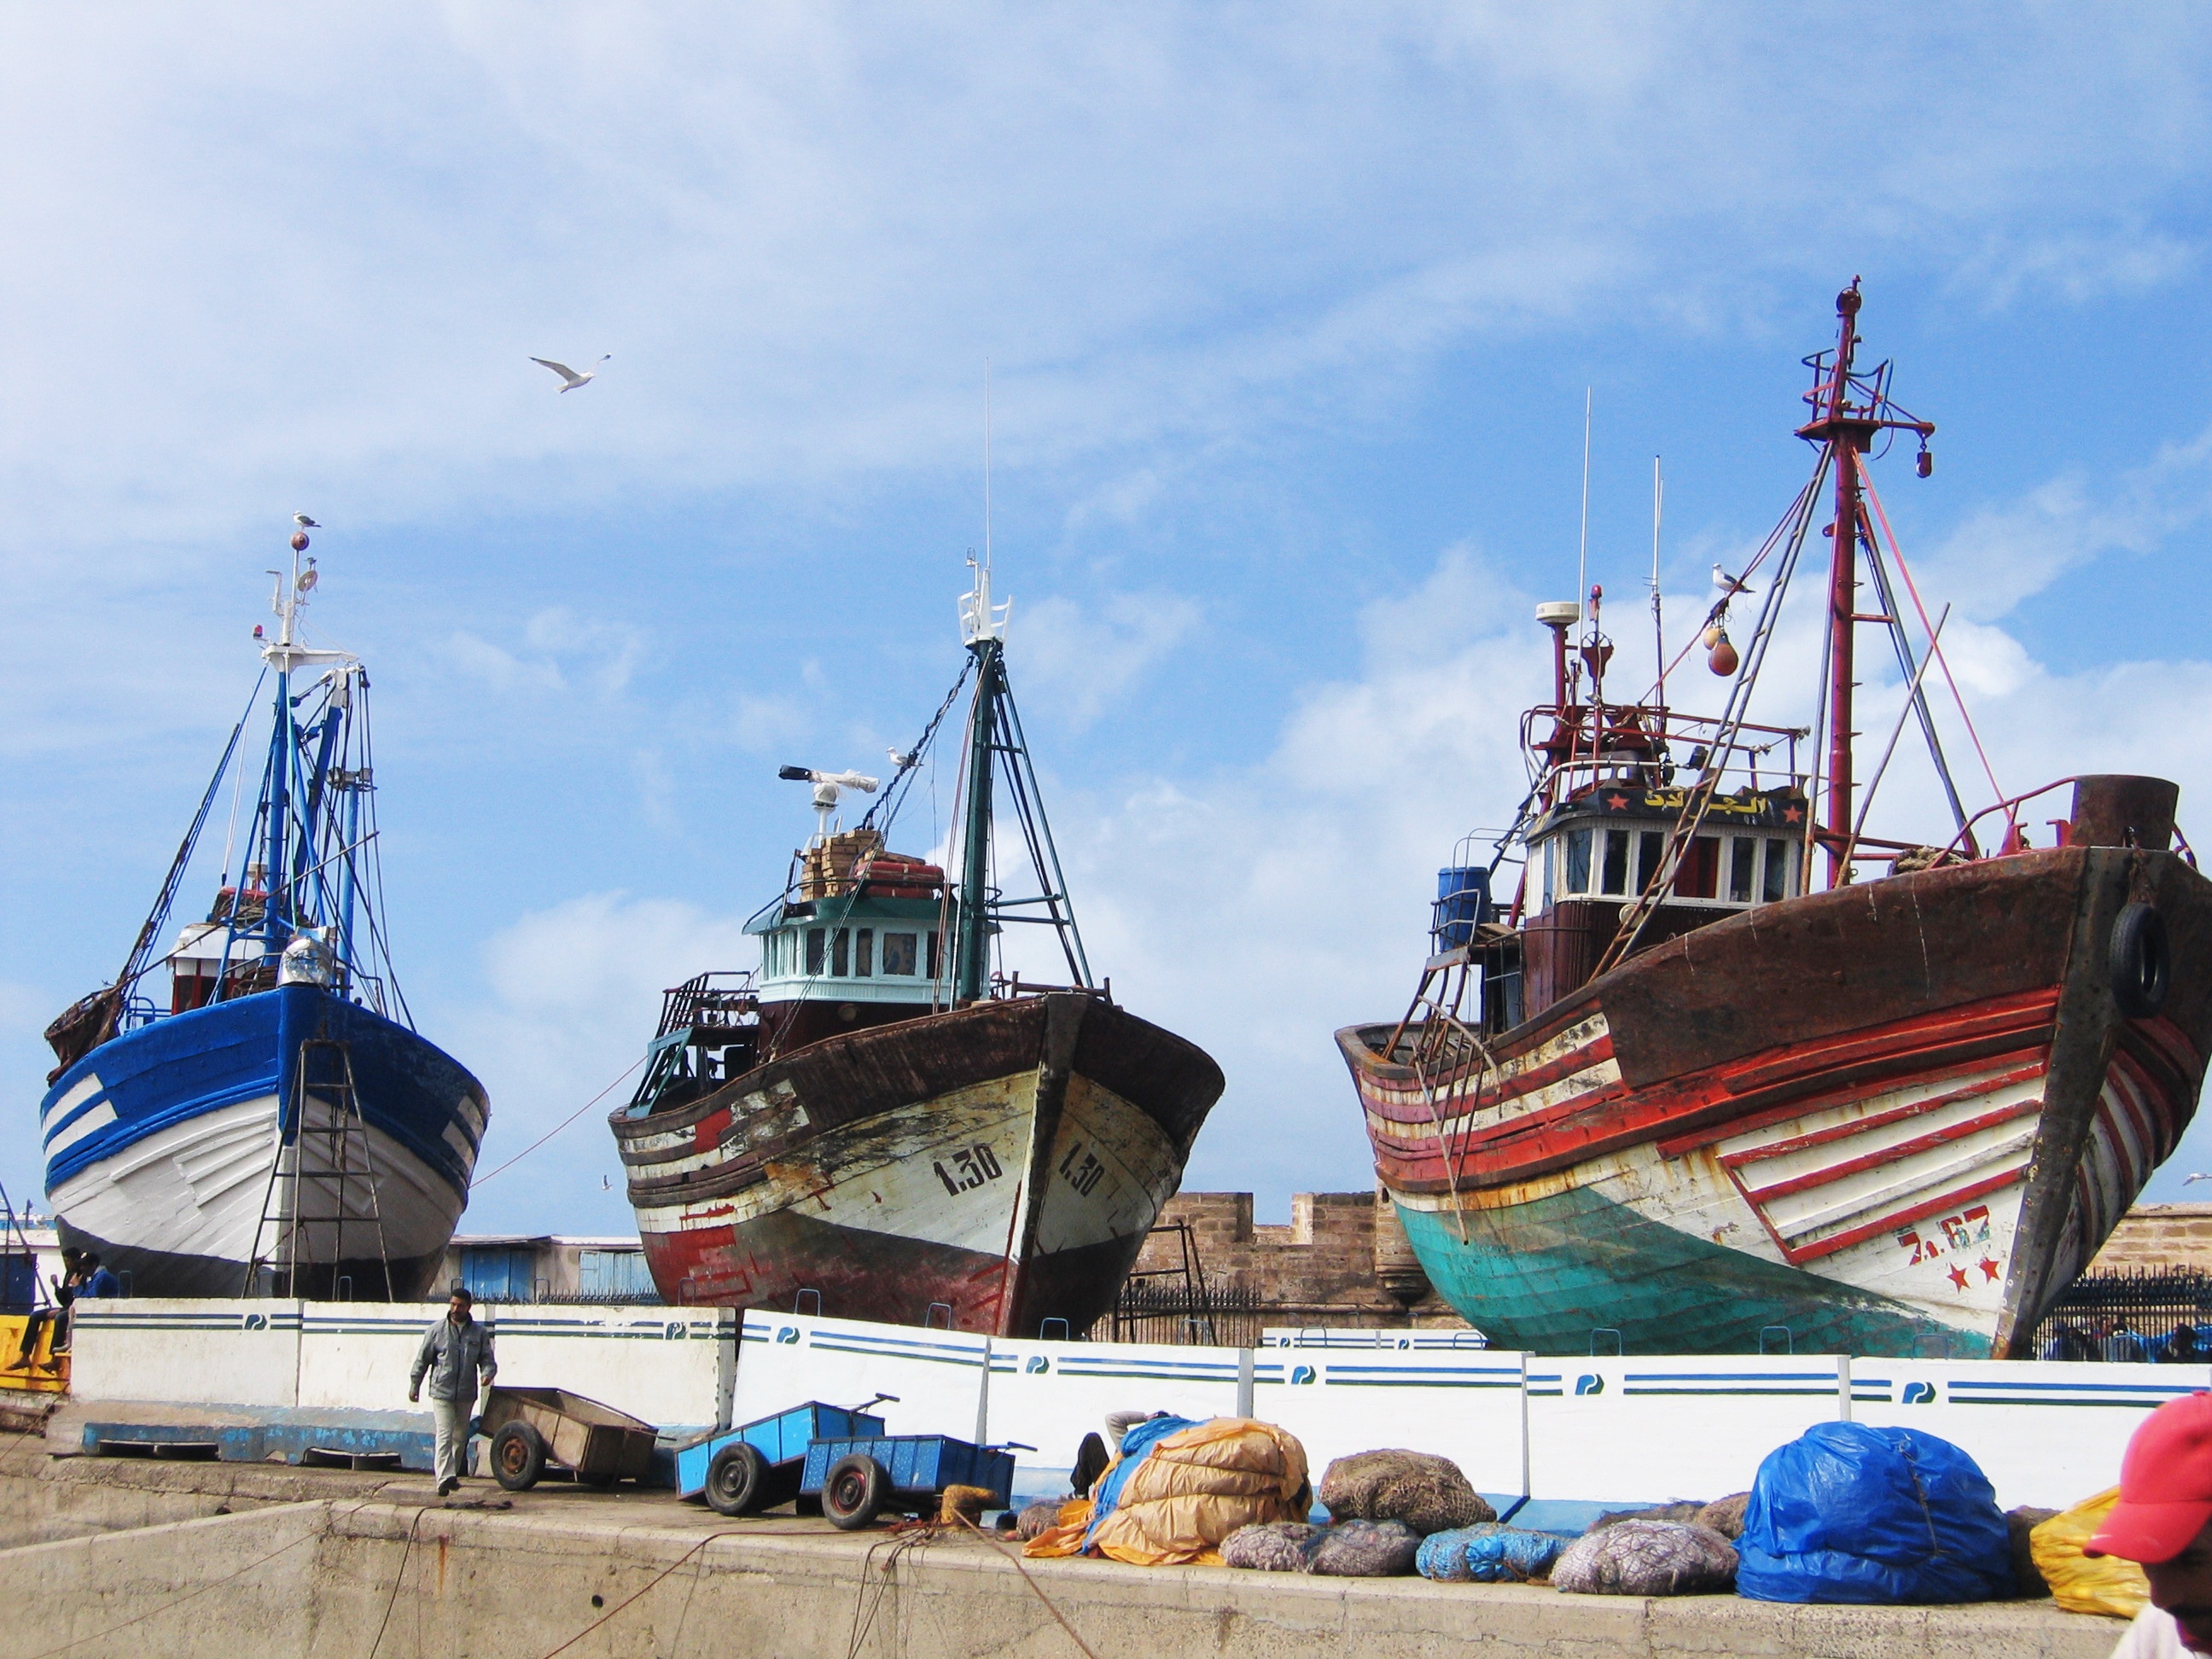 Fishing boats in the harbour of Essaouira